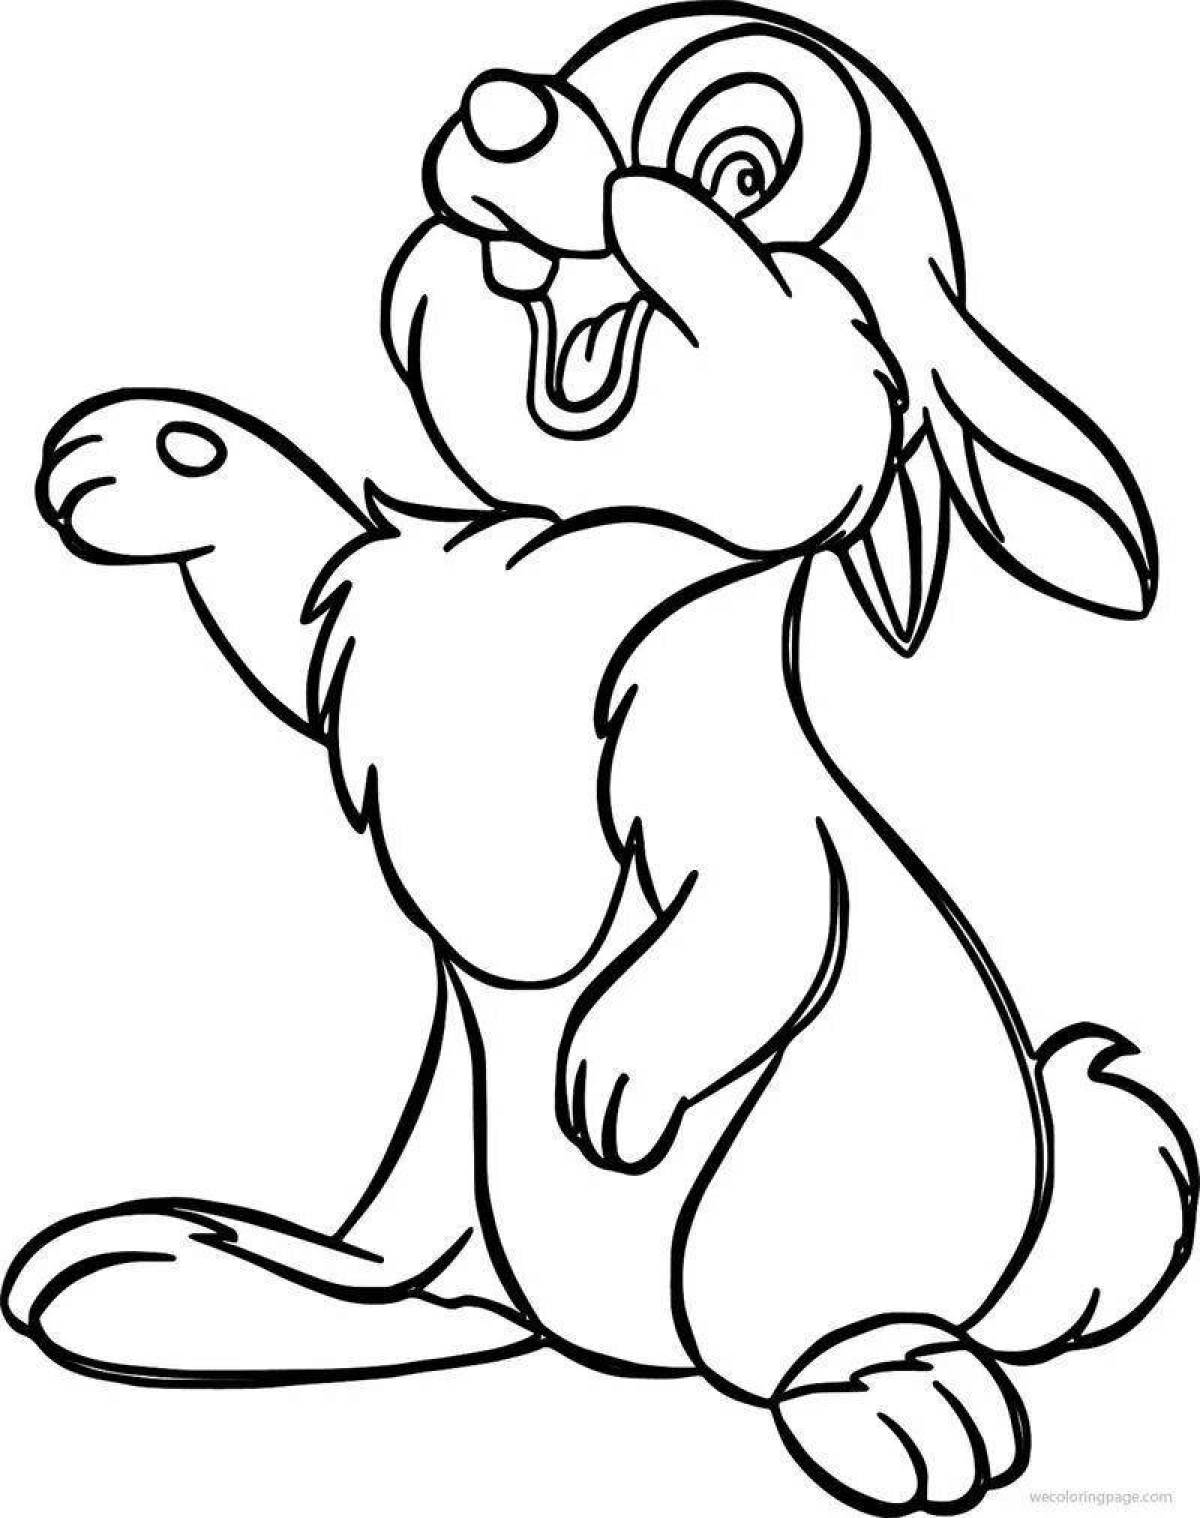 Coloring book funny bear and hare